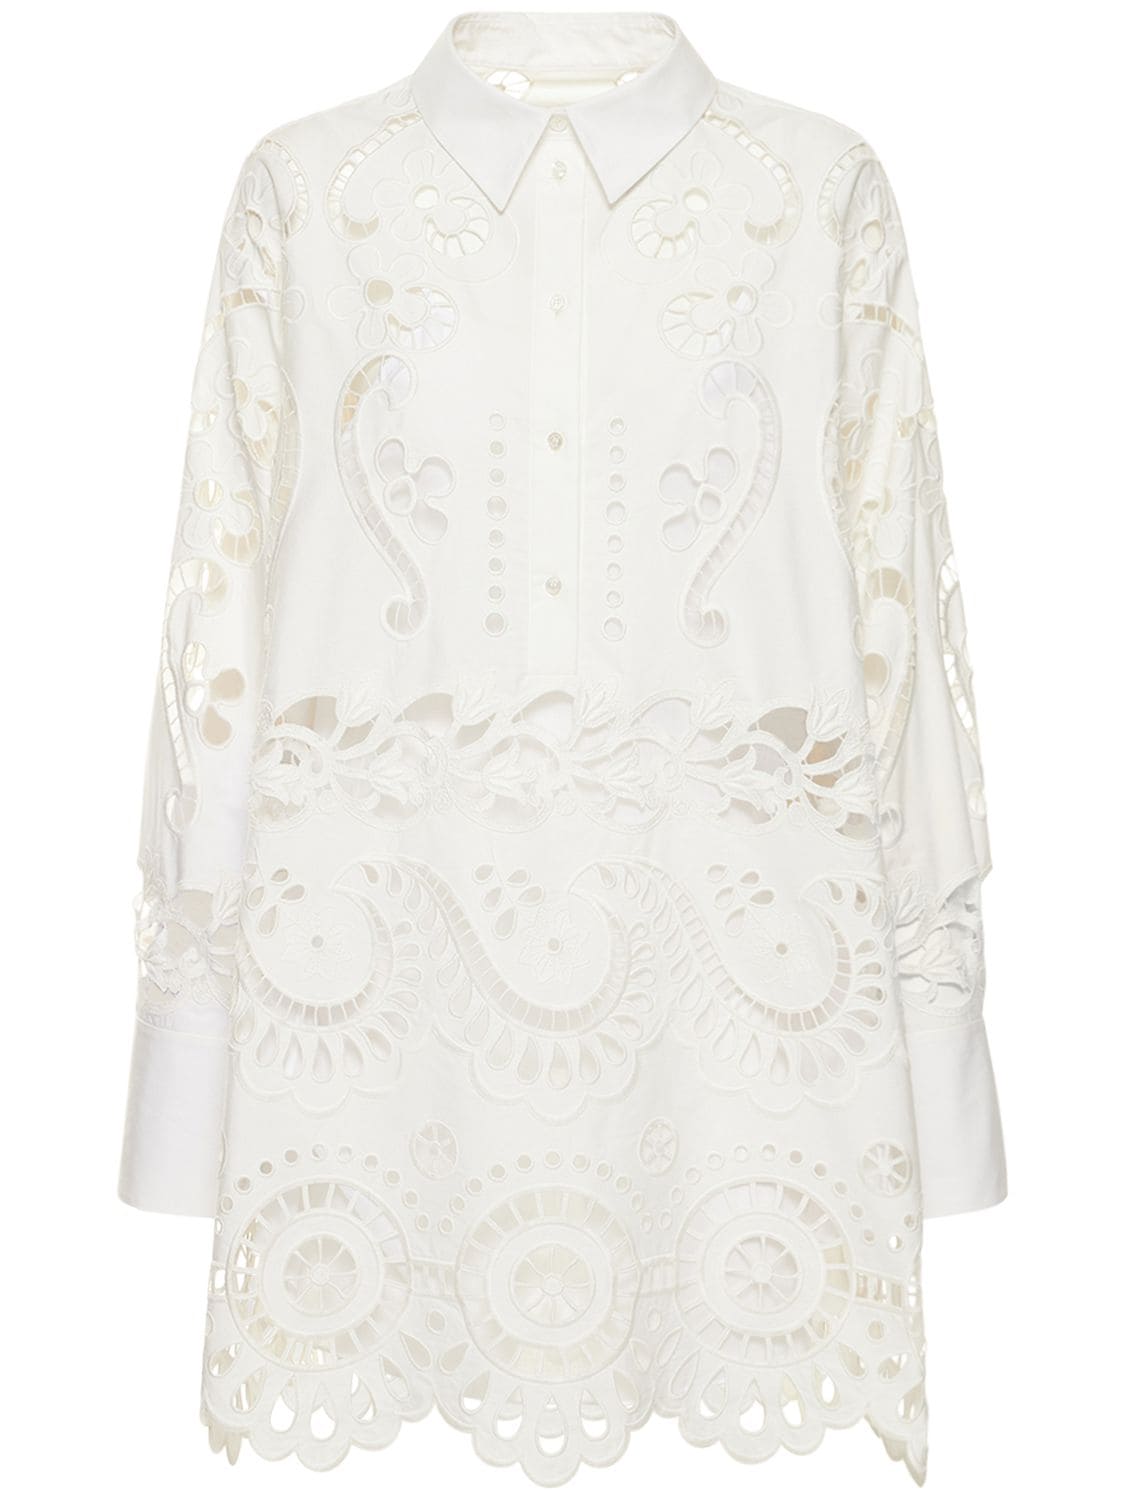 Image of Broderie Cotton Lace Oversize Shirt